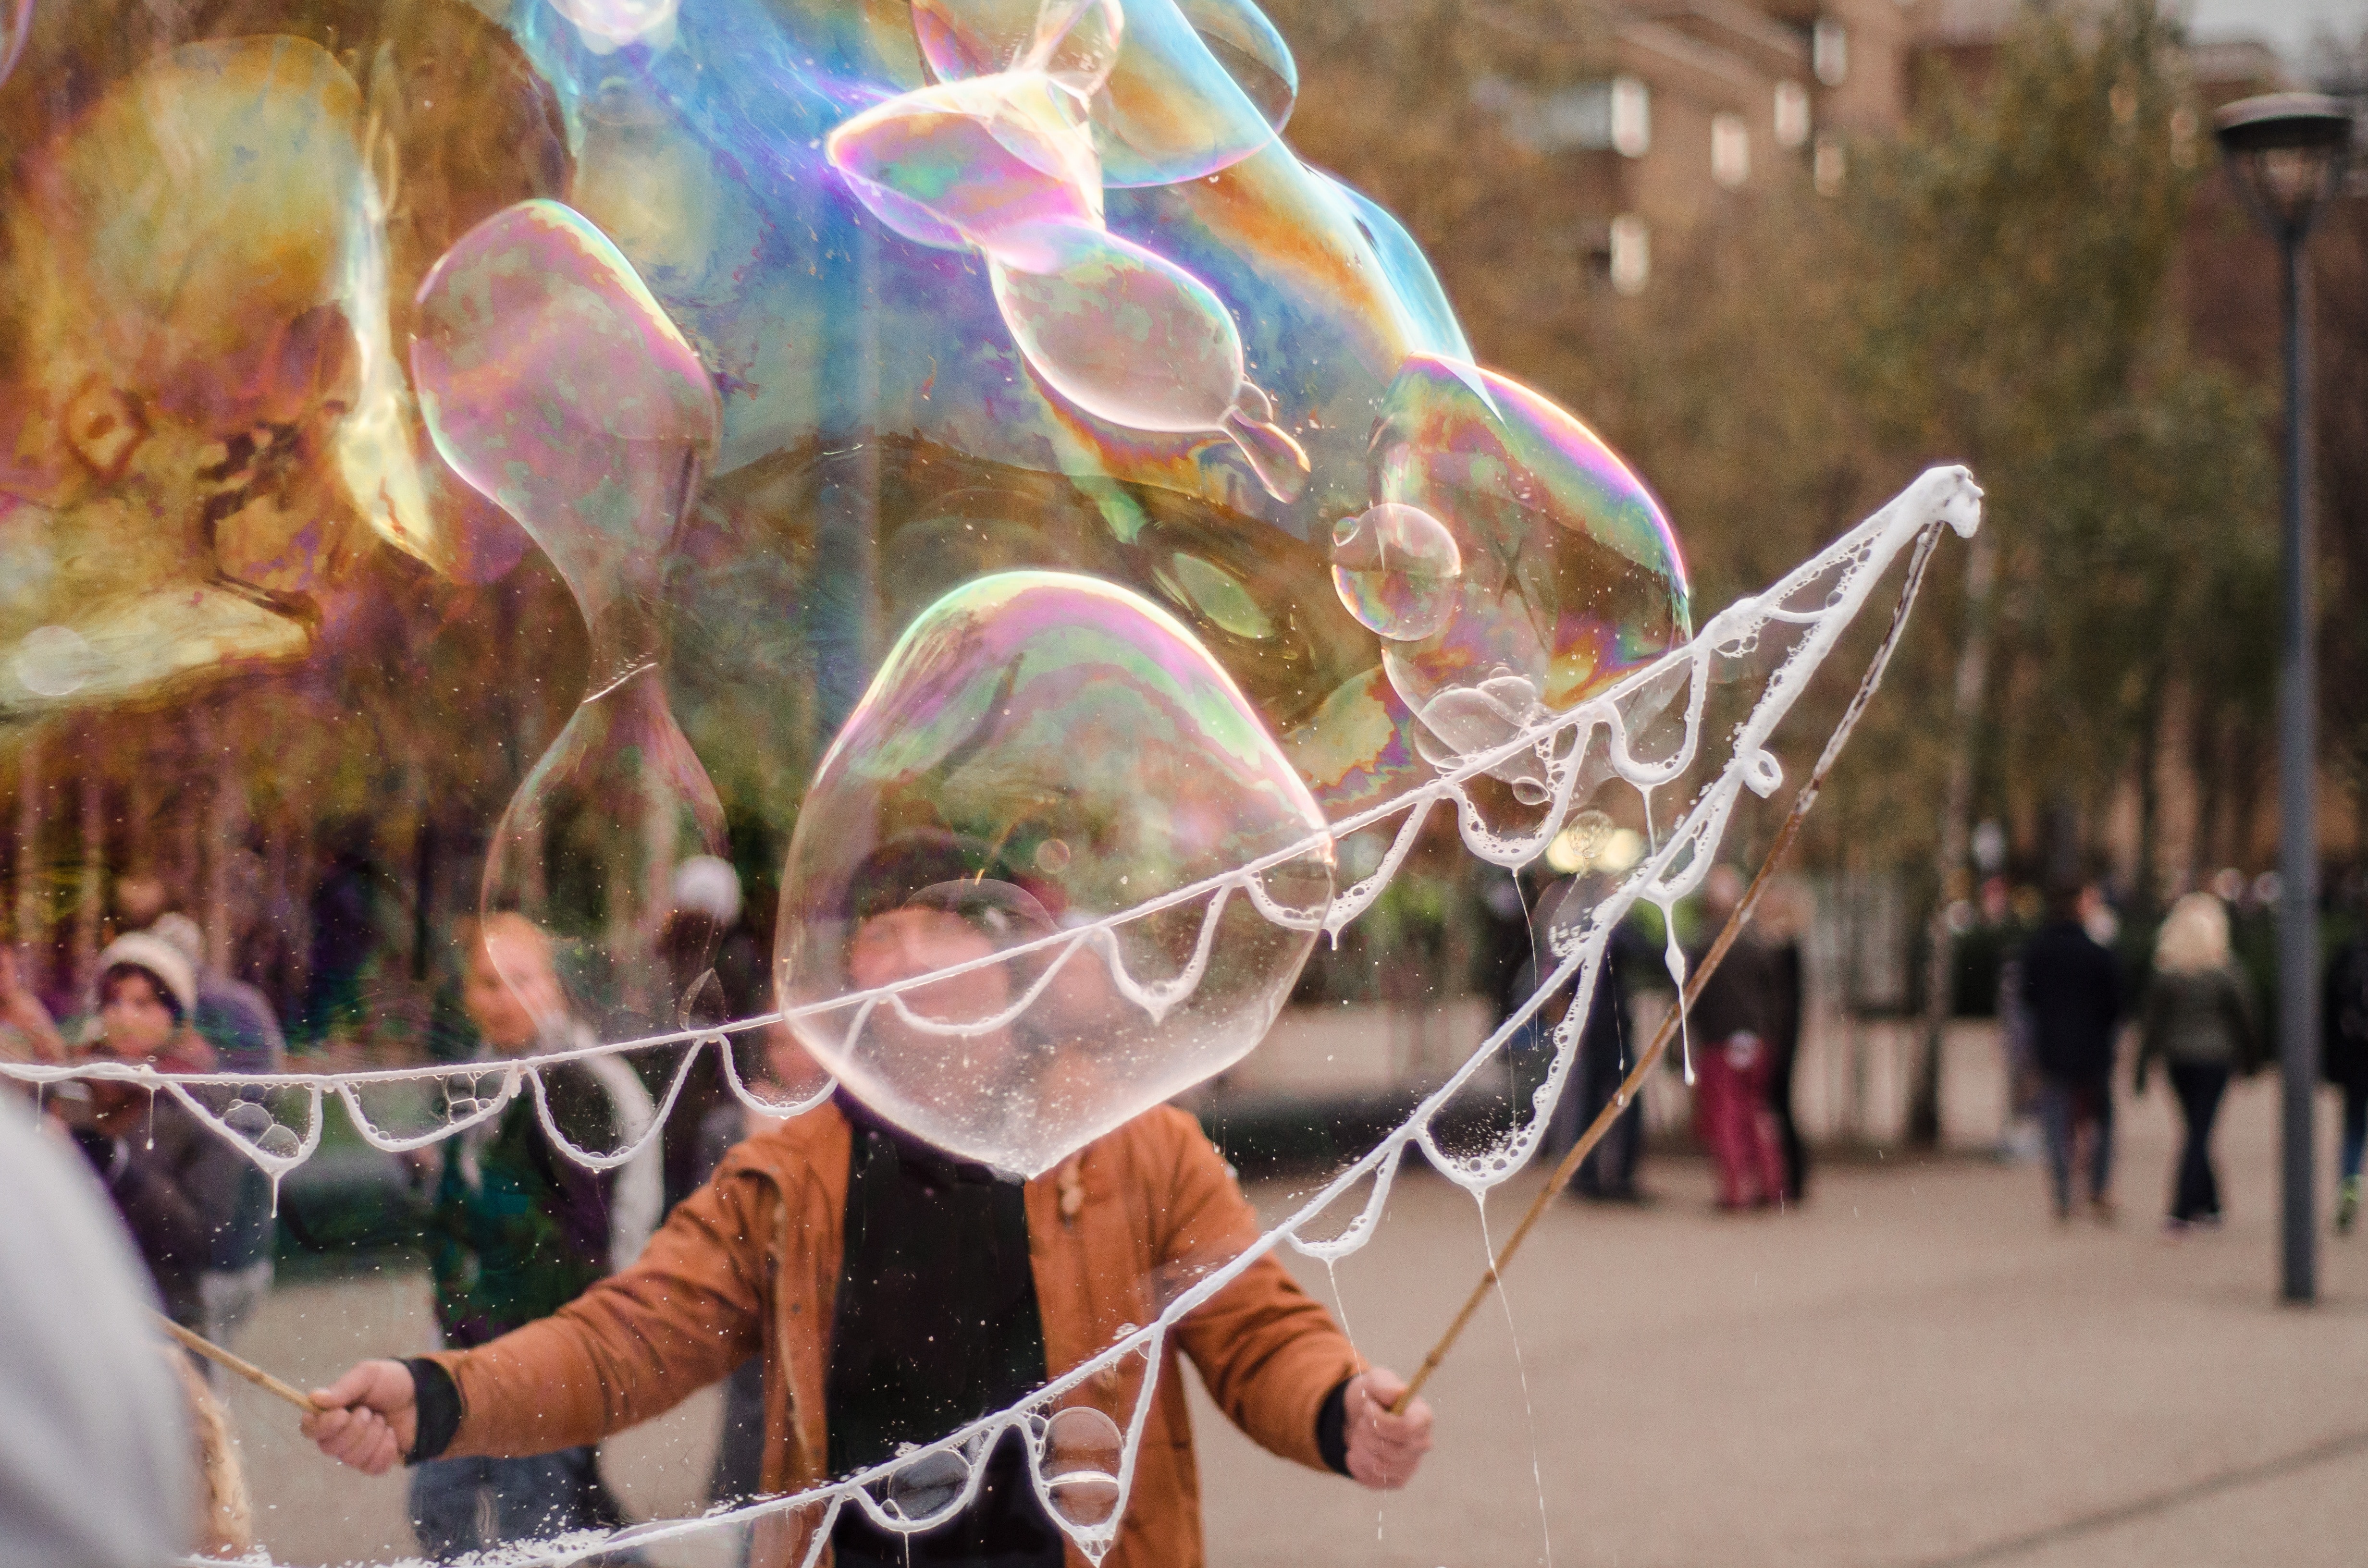 man forming bubbles using round frame during daytime